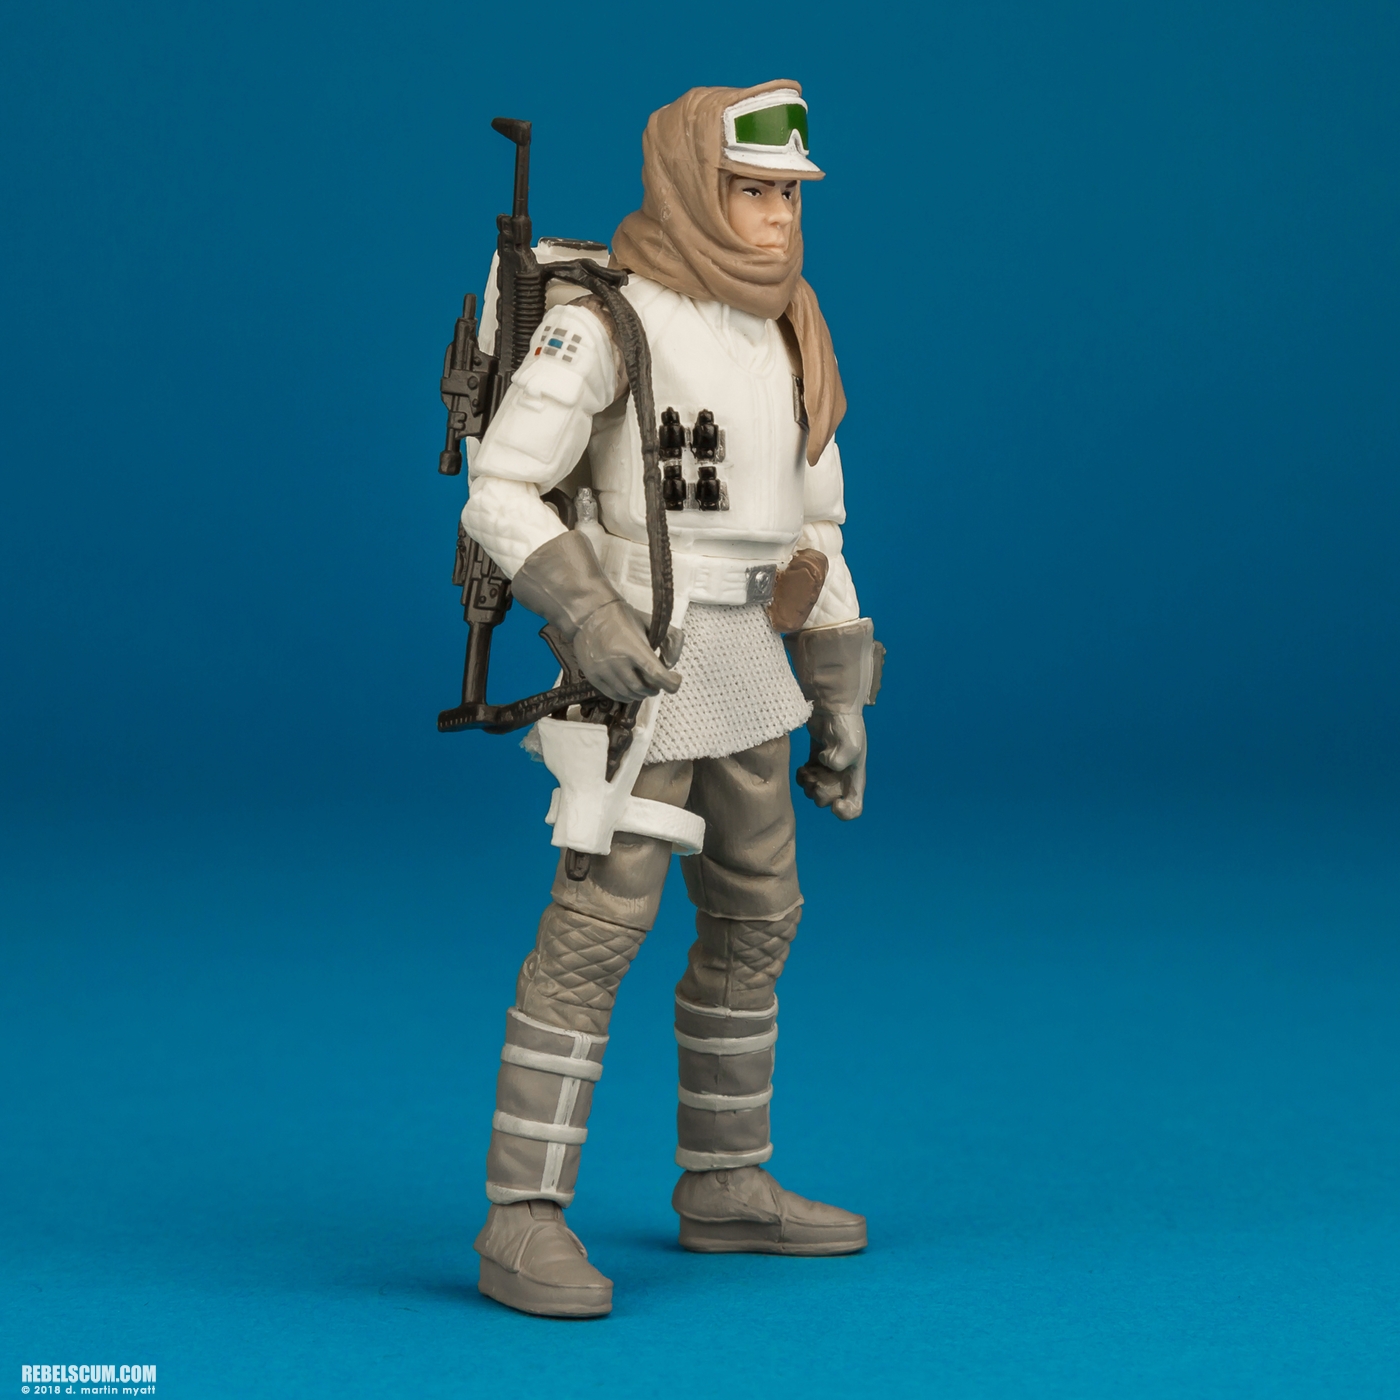 VC120-Rebel-Soldier-Hoth-The-Vintage-Collection-Hasbro-006.jpg